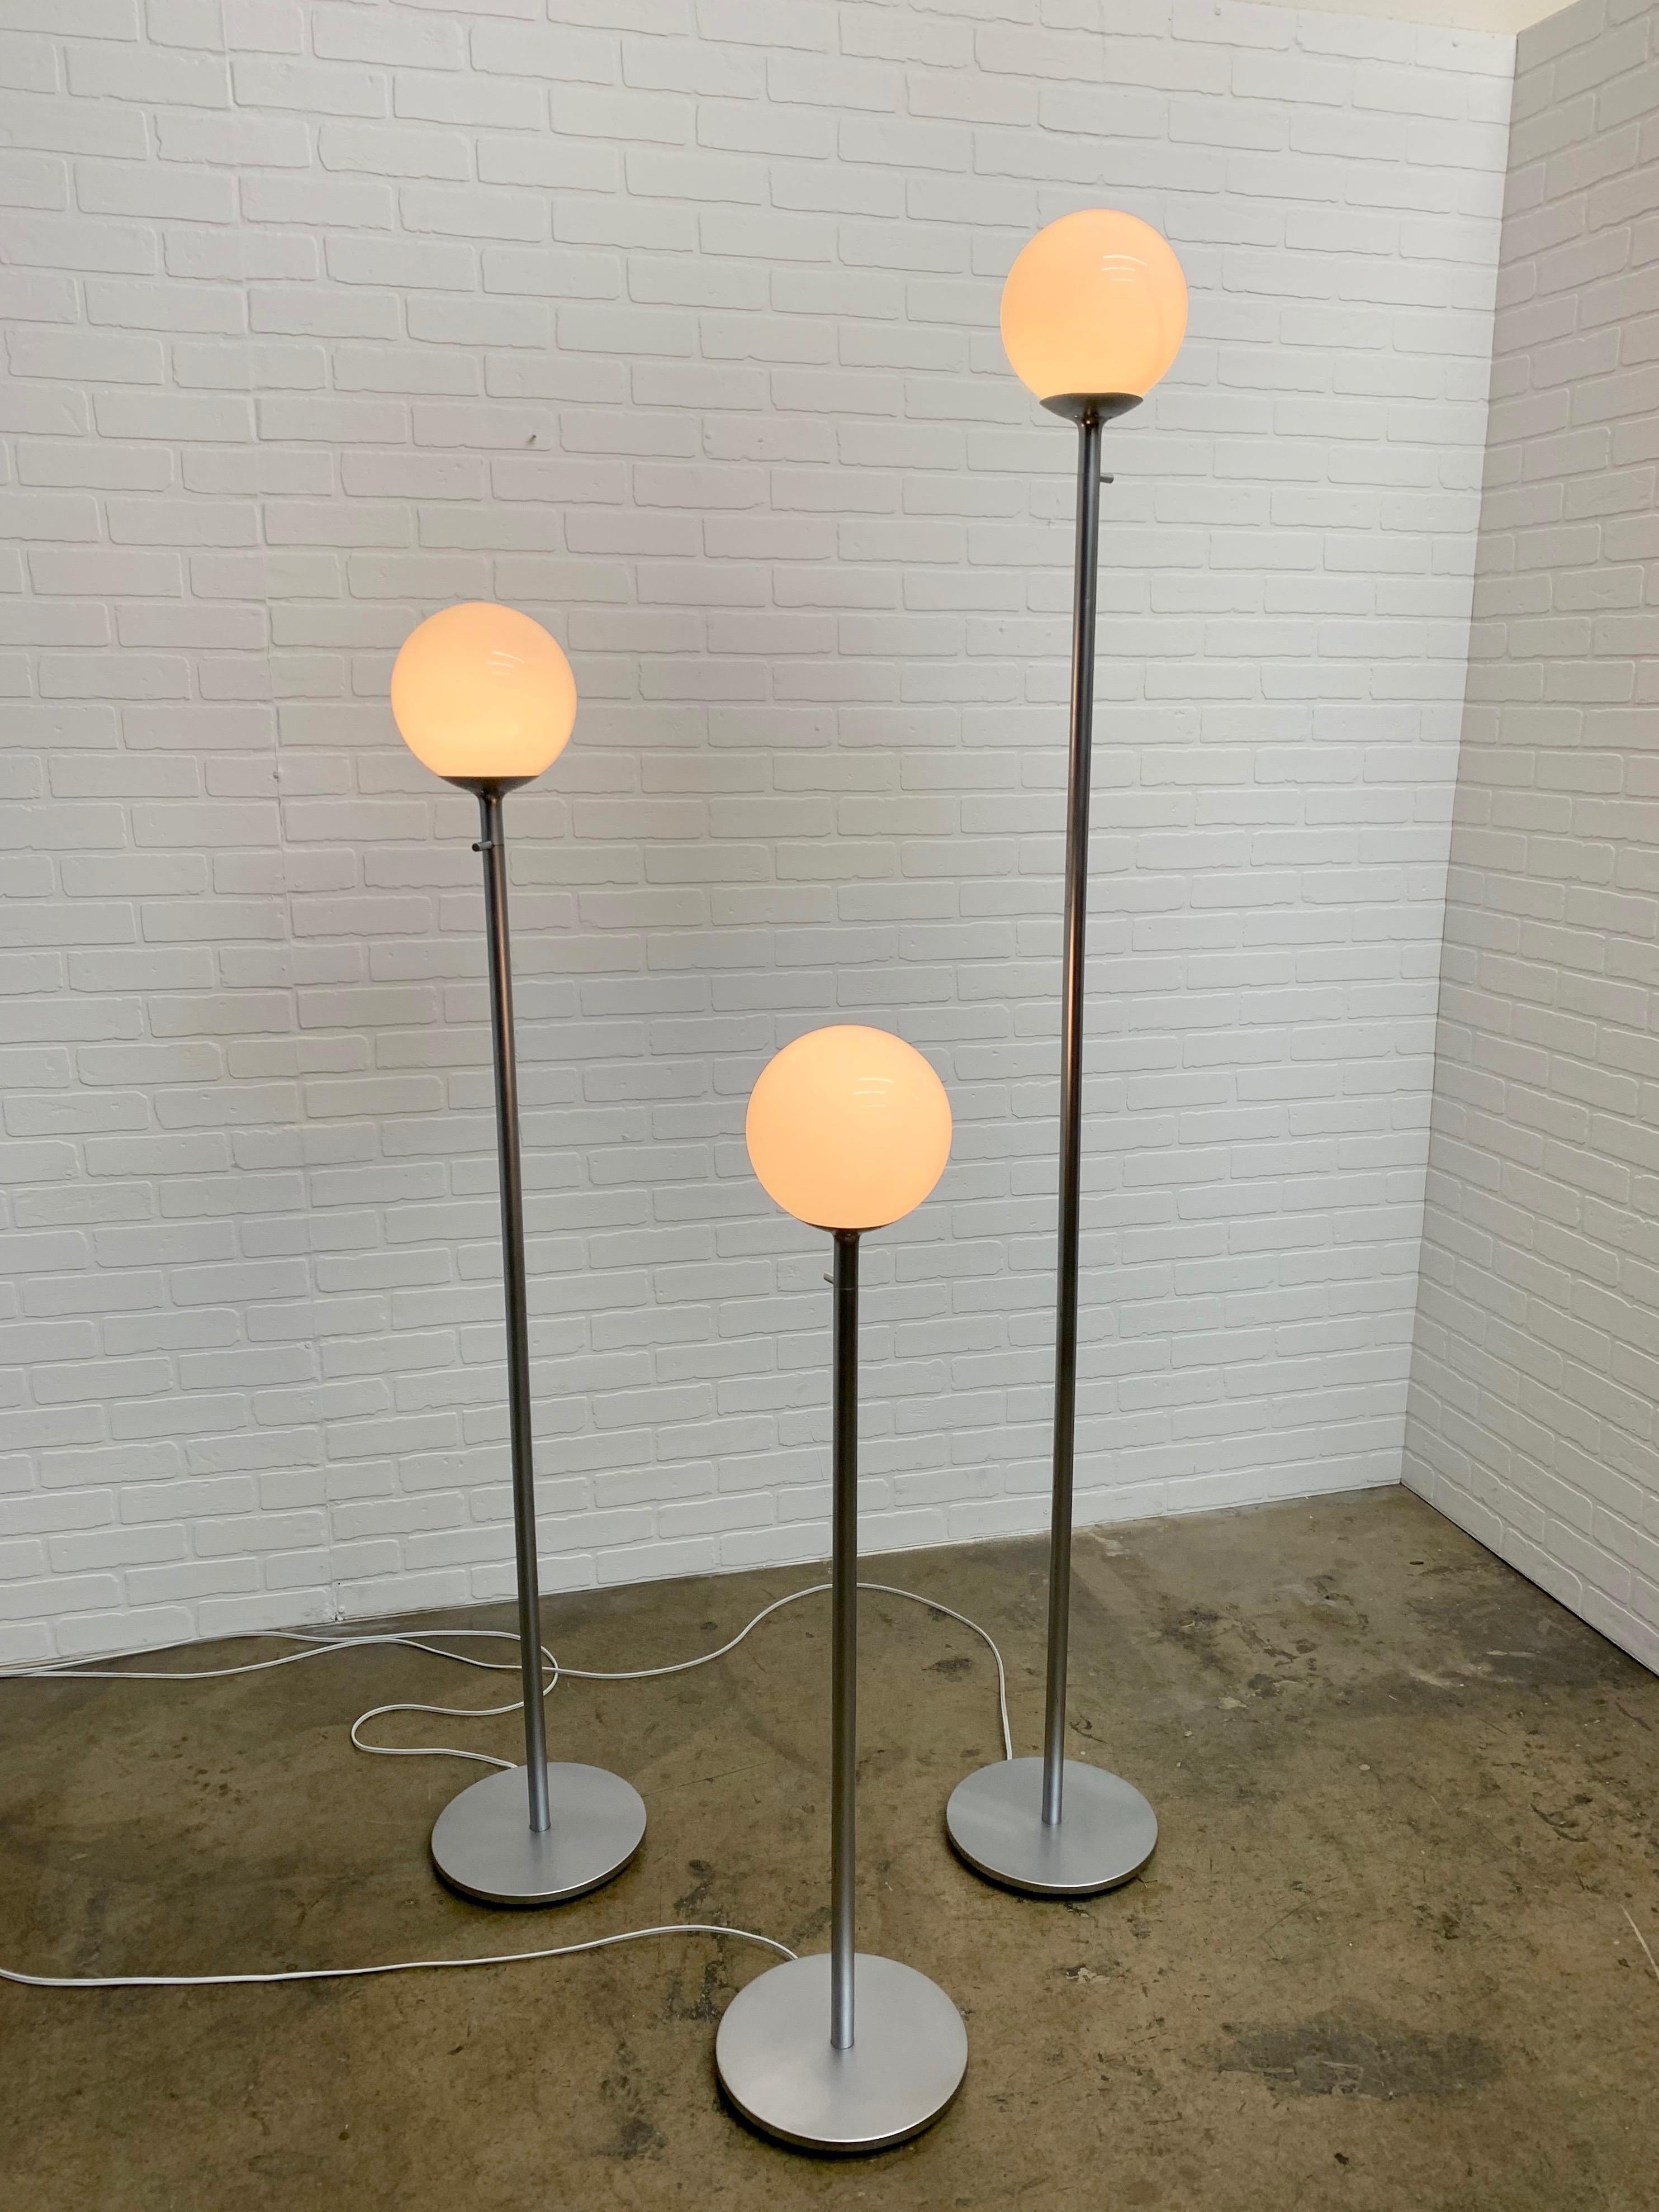 Set of three Pedestal metal base with glass threaded globe floor lamps by ClassiCon.
Measures: Width 10.5/8s
height
1. 76.25
2. 60.5
3. 44.75.